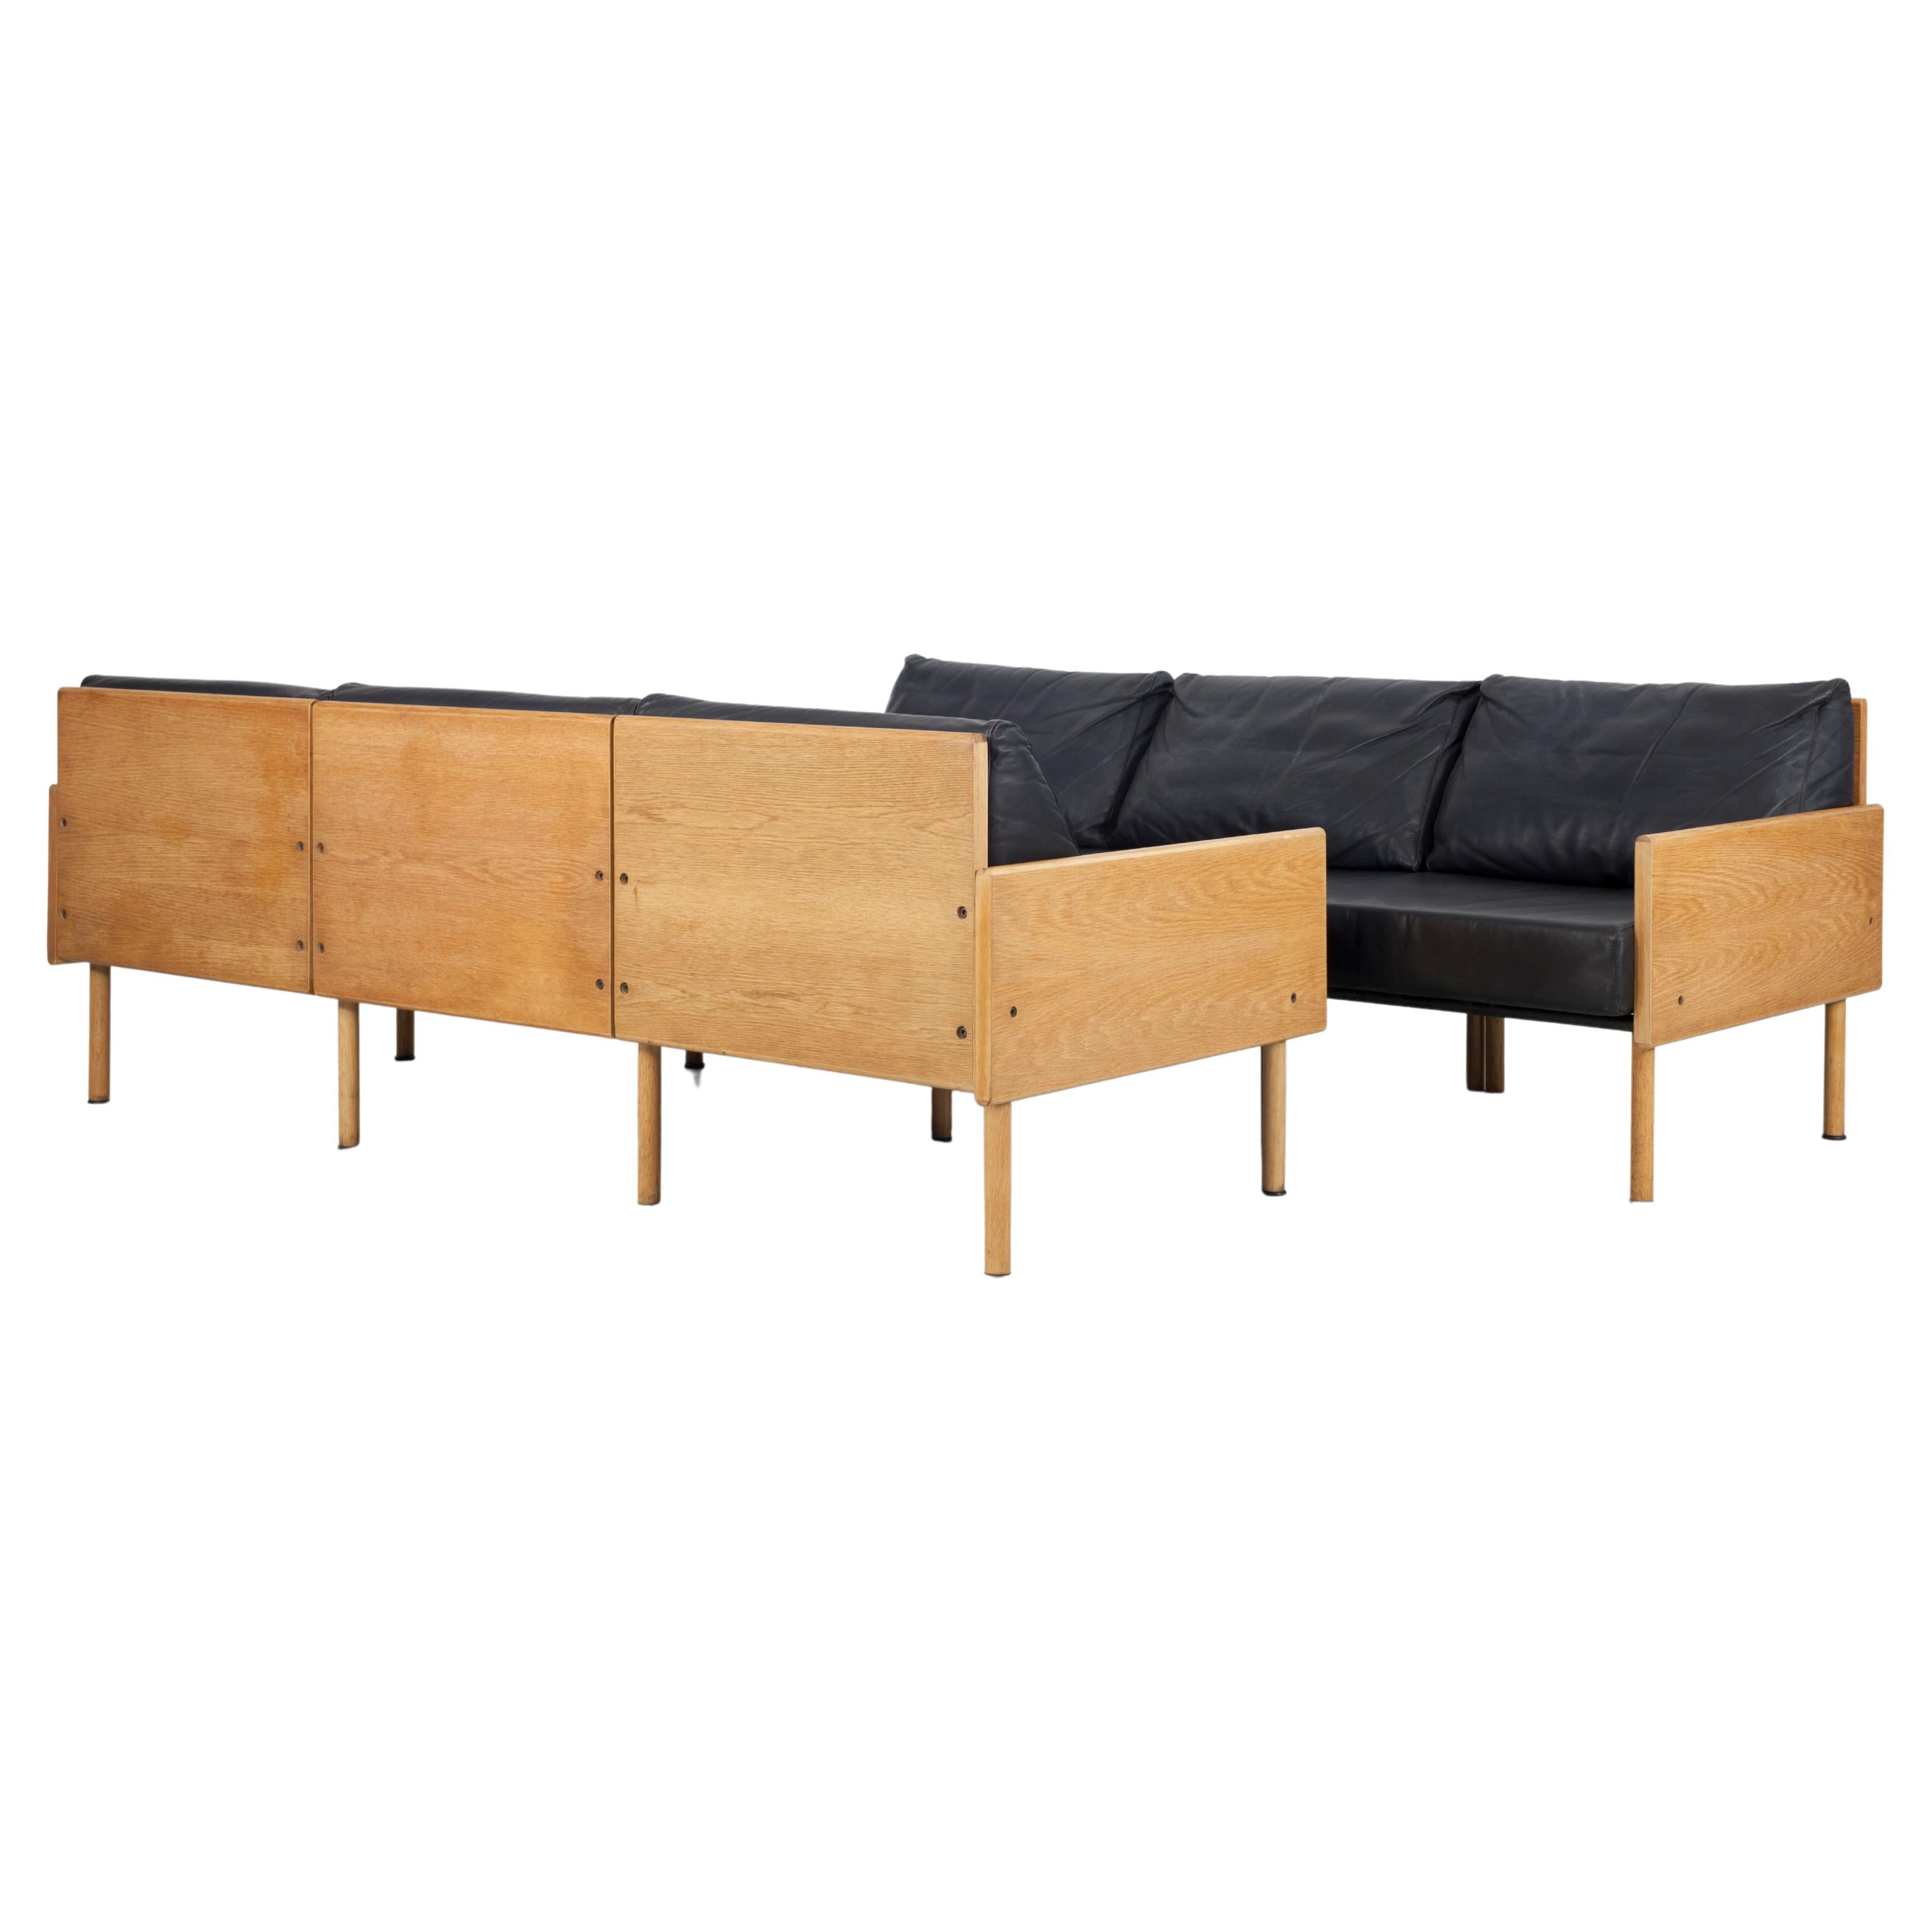 Set of 2 Sofas and 2 Chairs, by Yrjö Kukkapuro for Haimi Finland, 1963